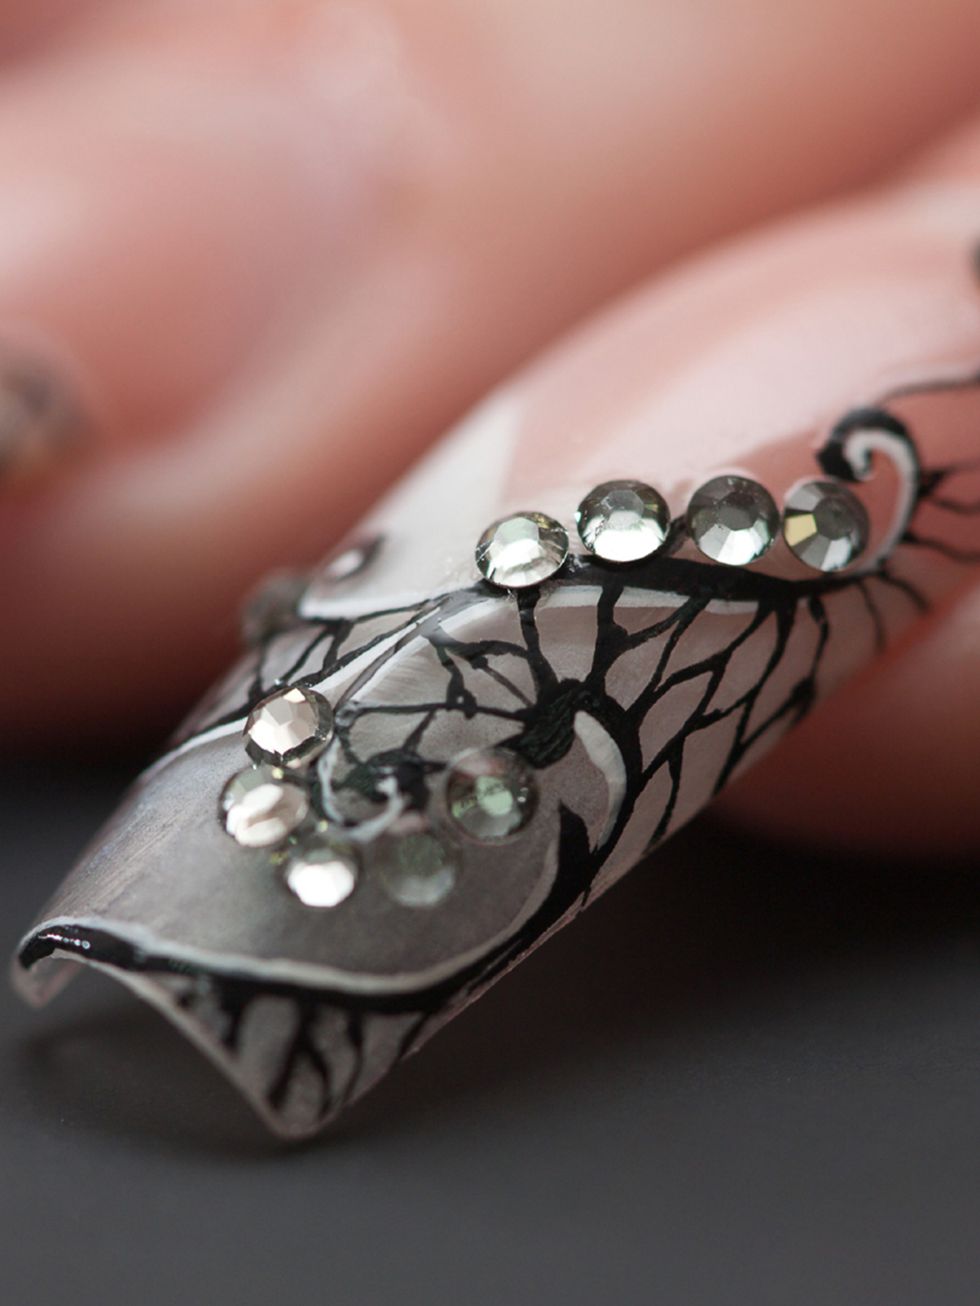 Finger, Skin, Style, Nail, Fashion, Jewellery, Metal, Natural material, Nail polish, Body jewelry, 